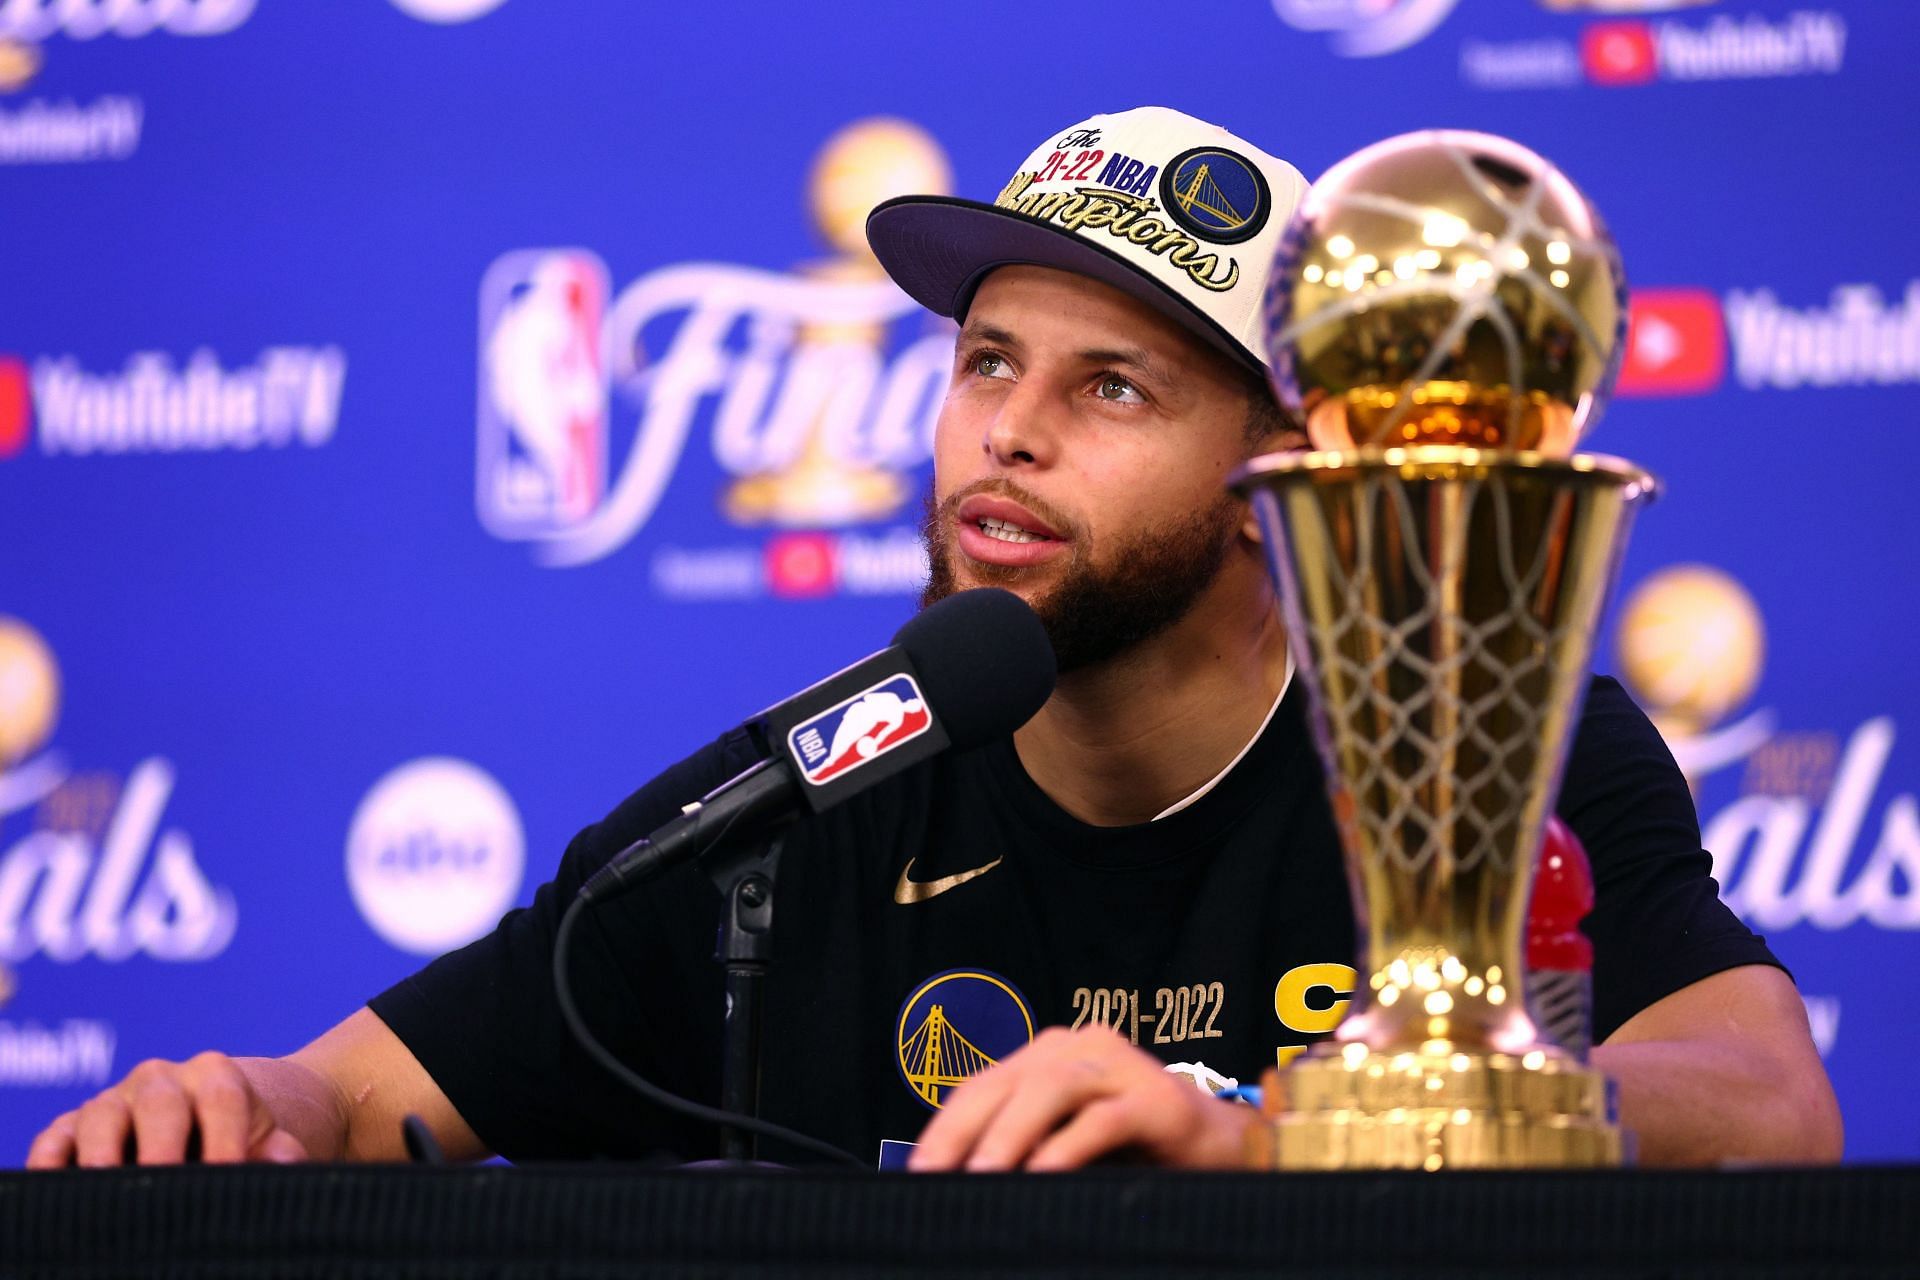 Golden State Warriors point guard Stephen Curry has now won four NBA Championships.